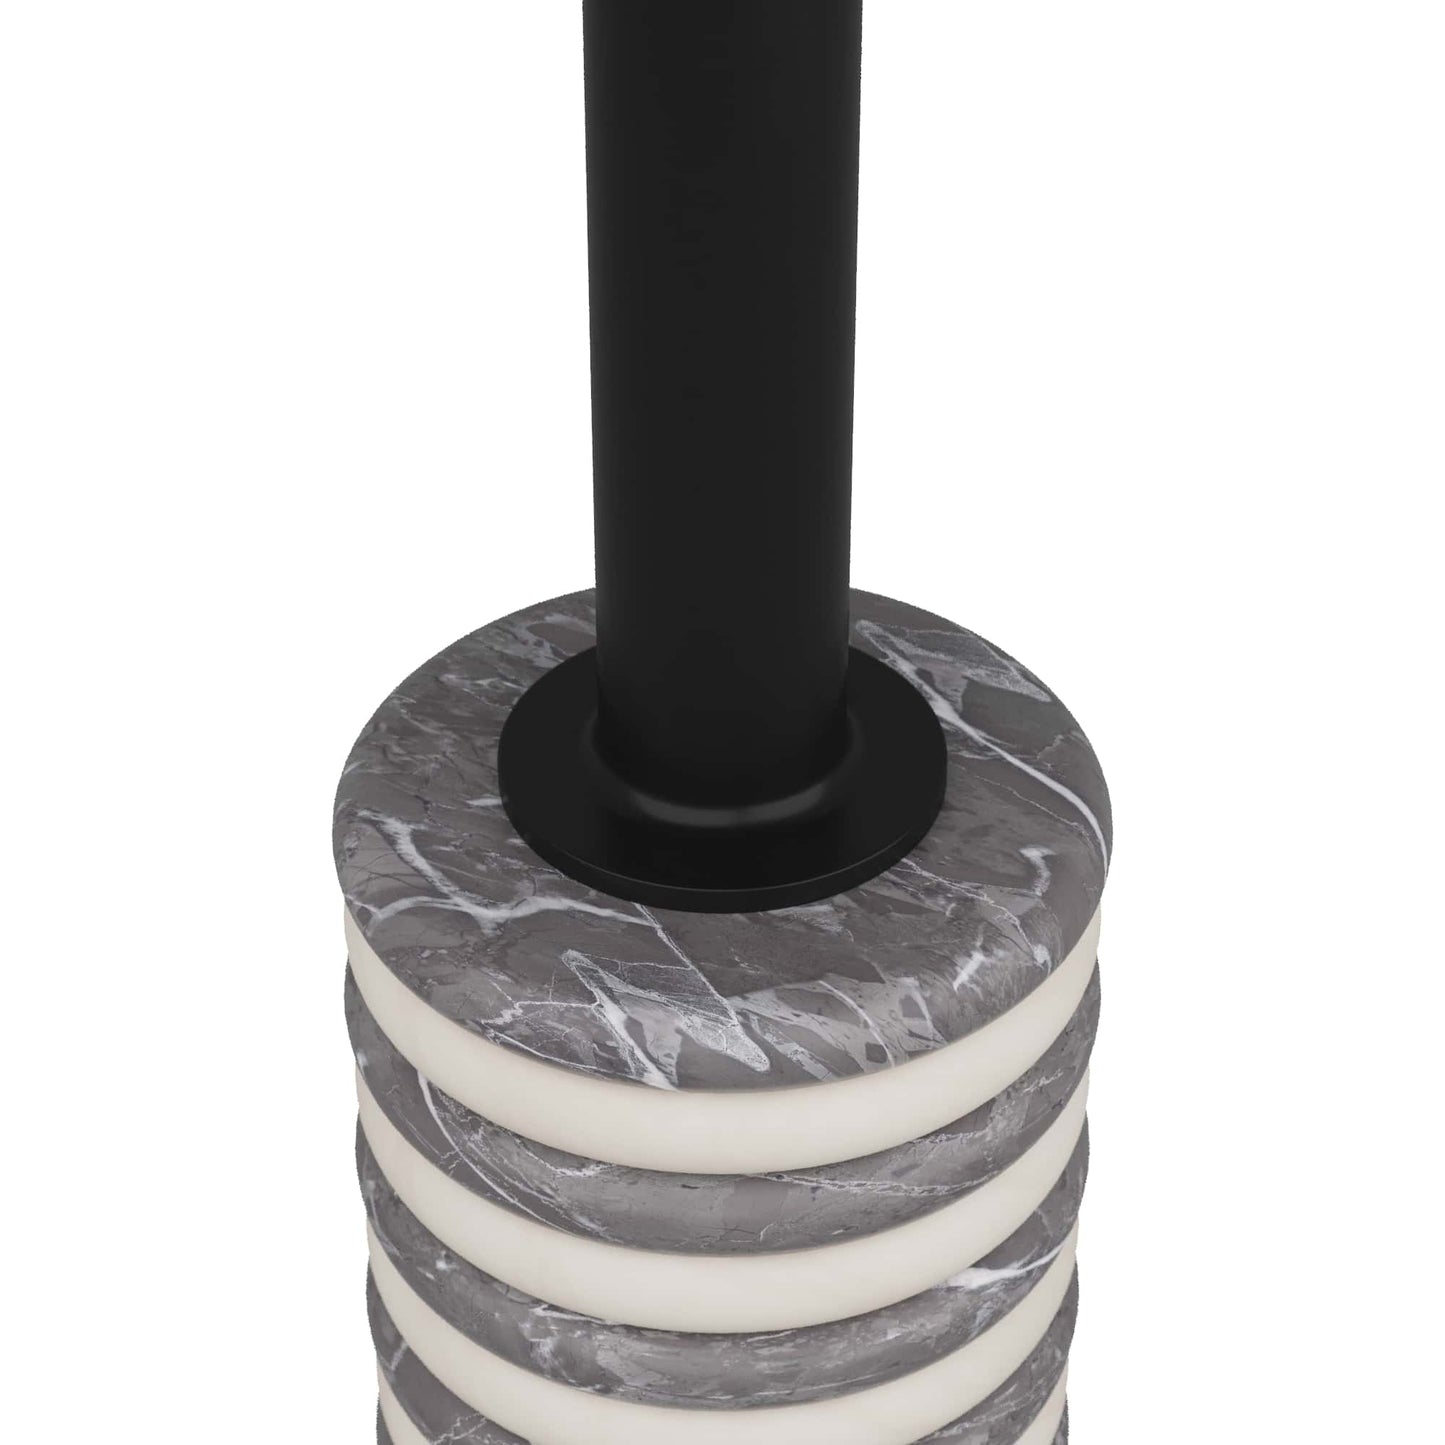 Paola Accent Table - Graphic Black and White Marble with Iron Pedestal